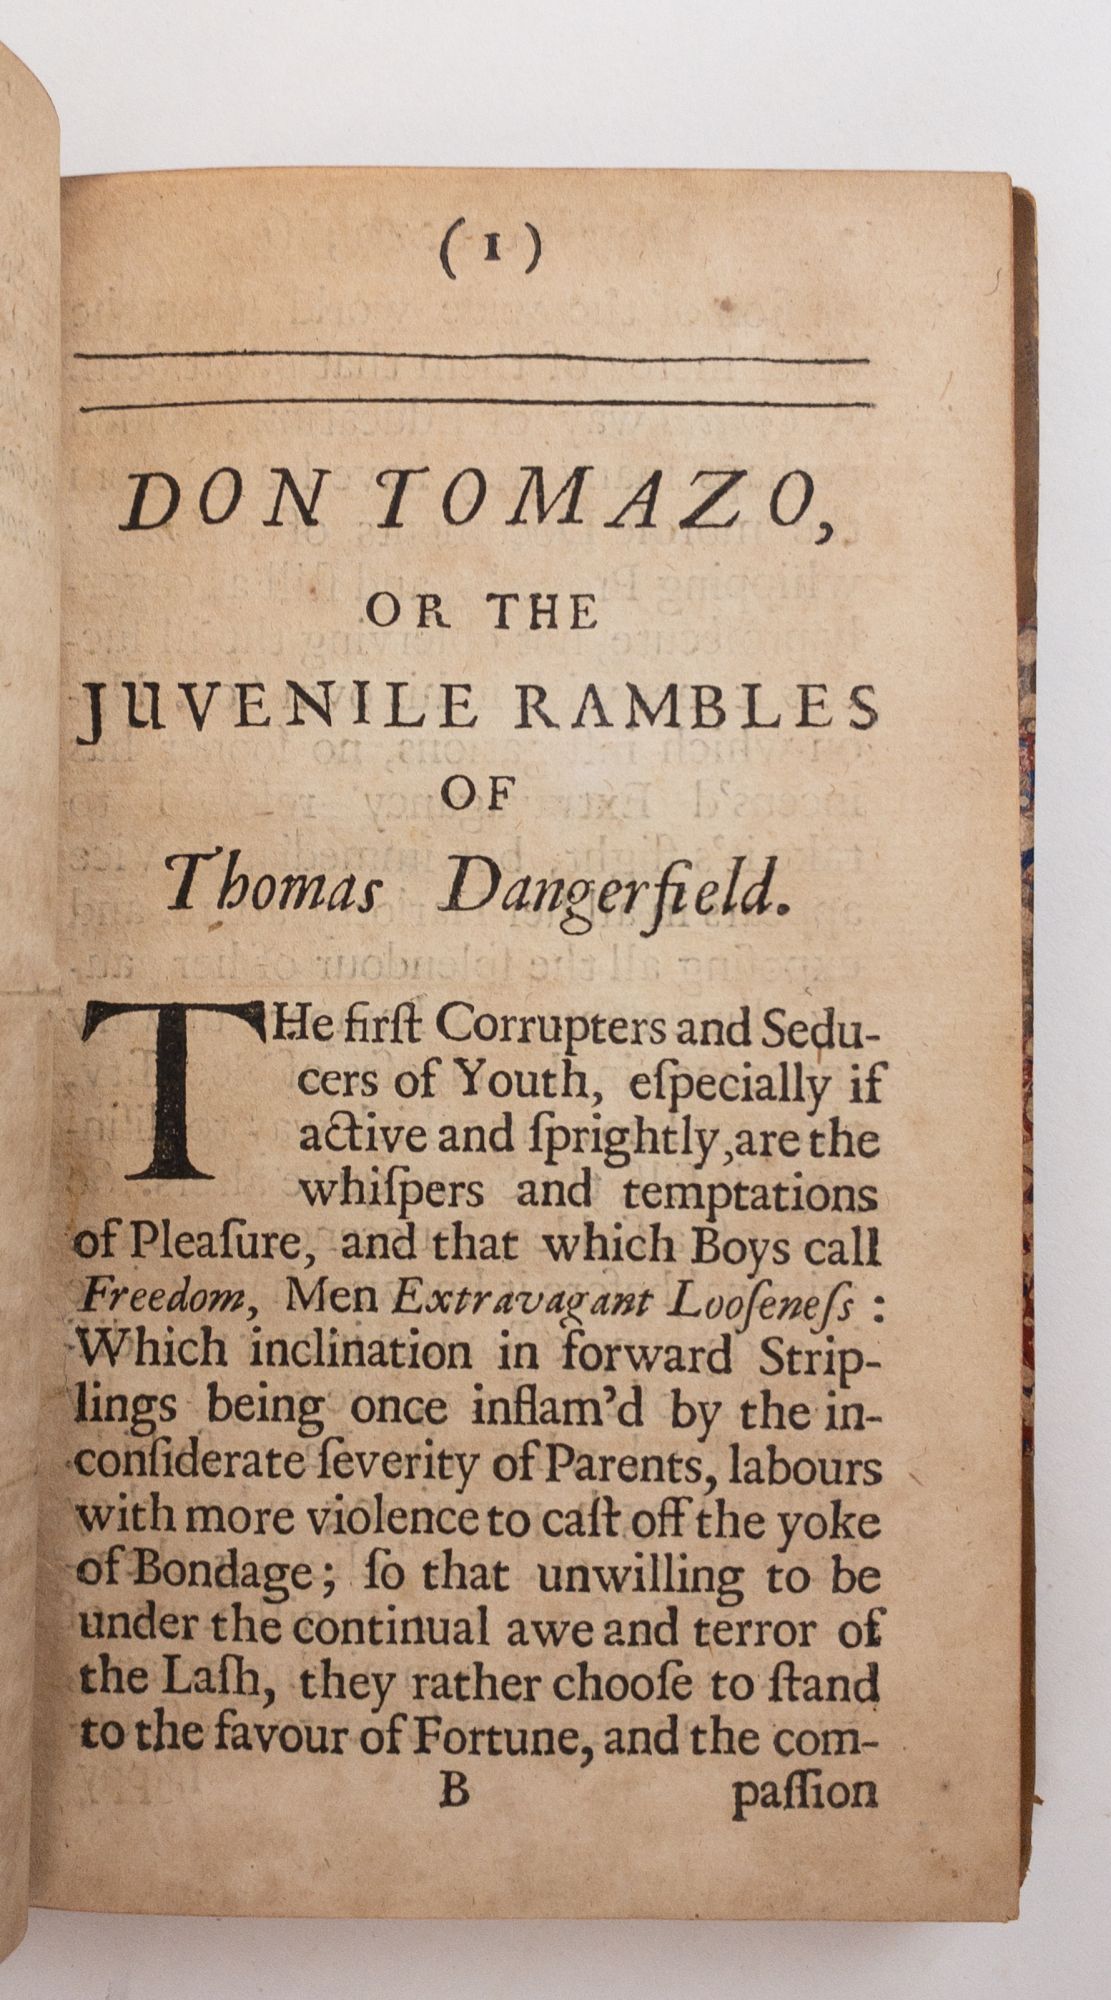 Product Image for DON TOMAZO, OR THE JUVENILE RAMBLES OF THOMAS DANGERFIELD